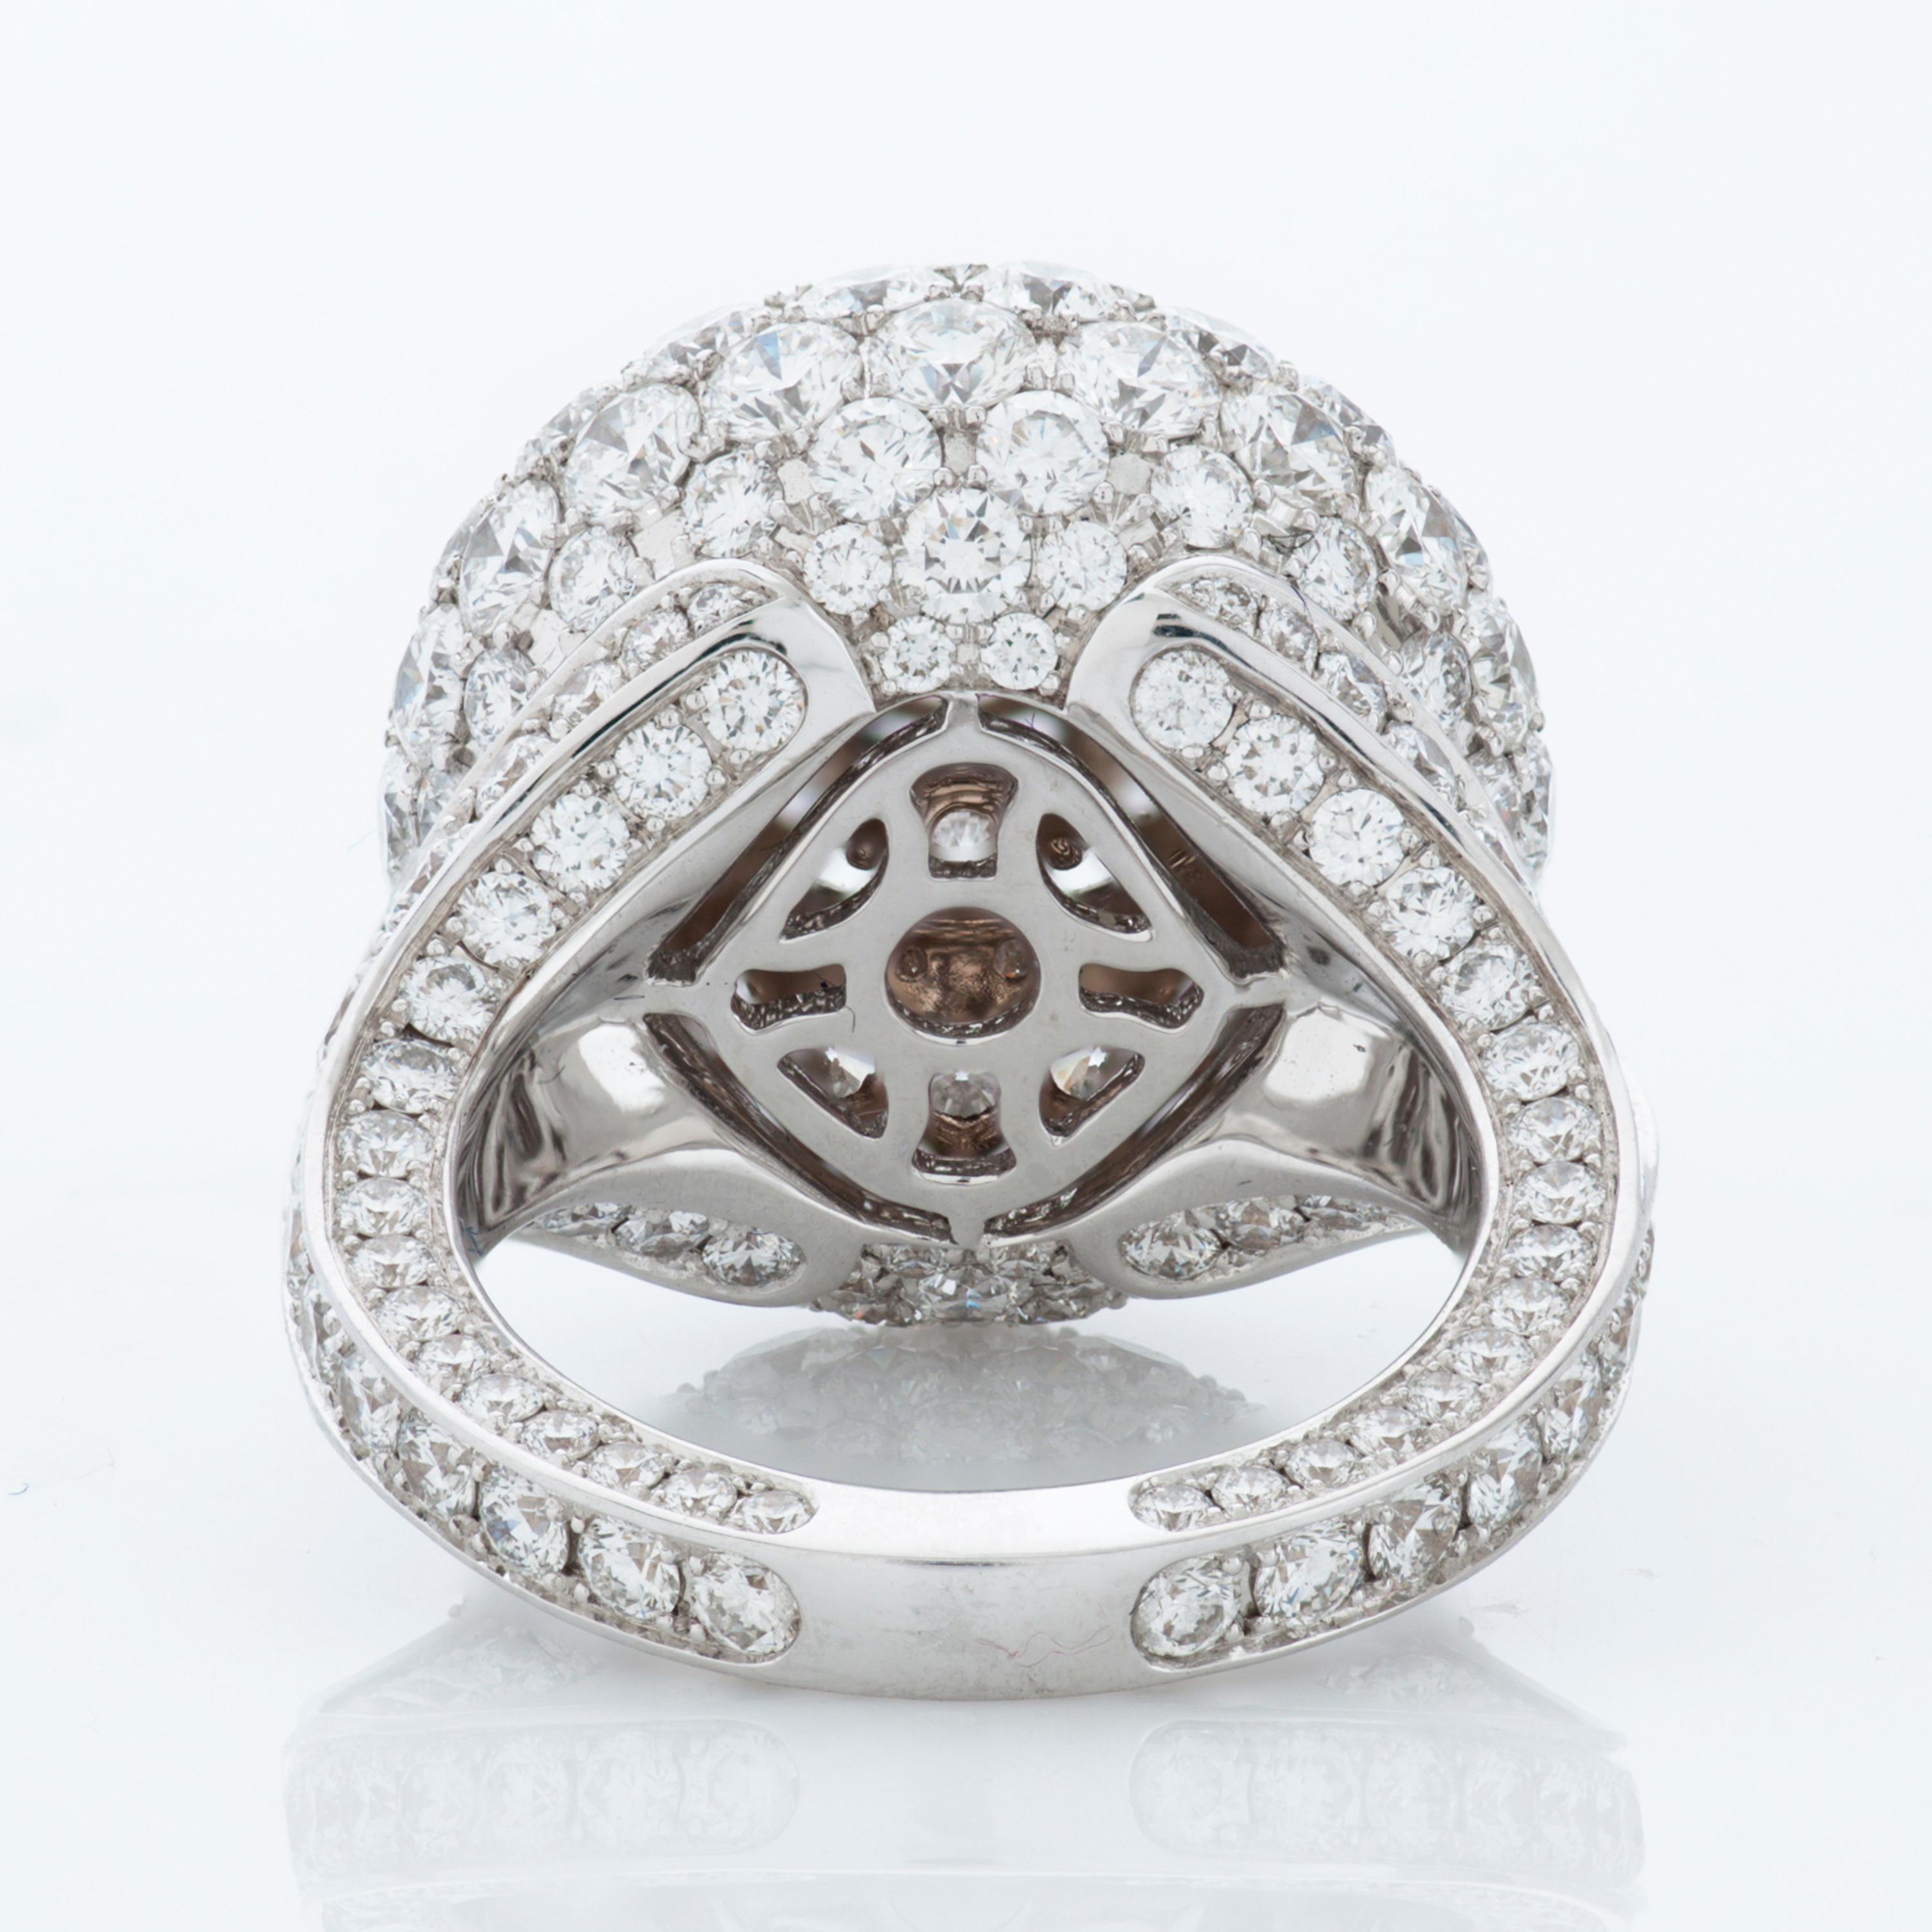 Round Cut Graff Pave Diamond Bombe Ring in 18kwg with 1.00ct G/VVS2 Round Diamond Center For Sale